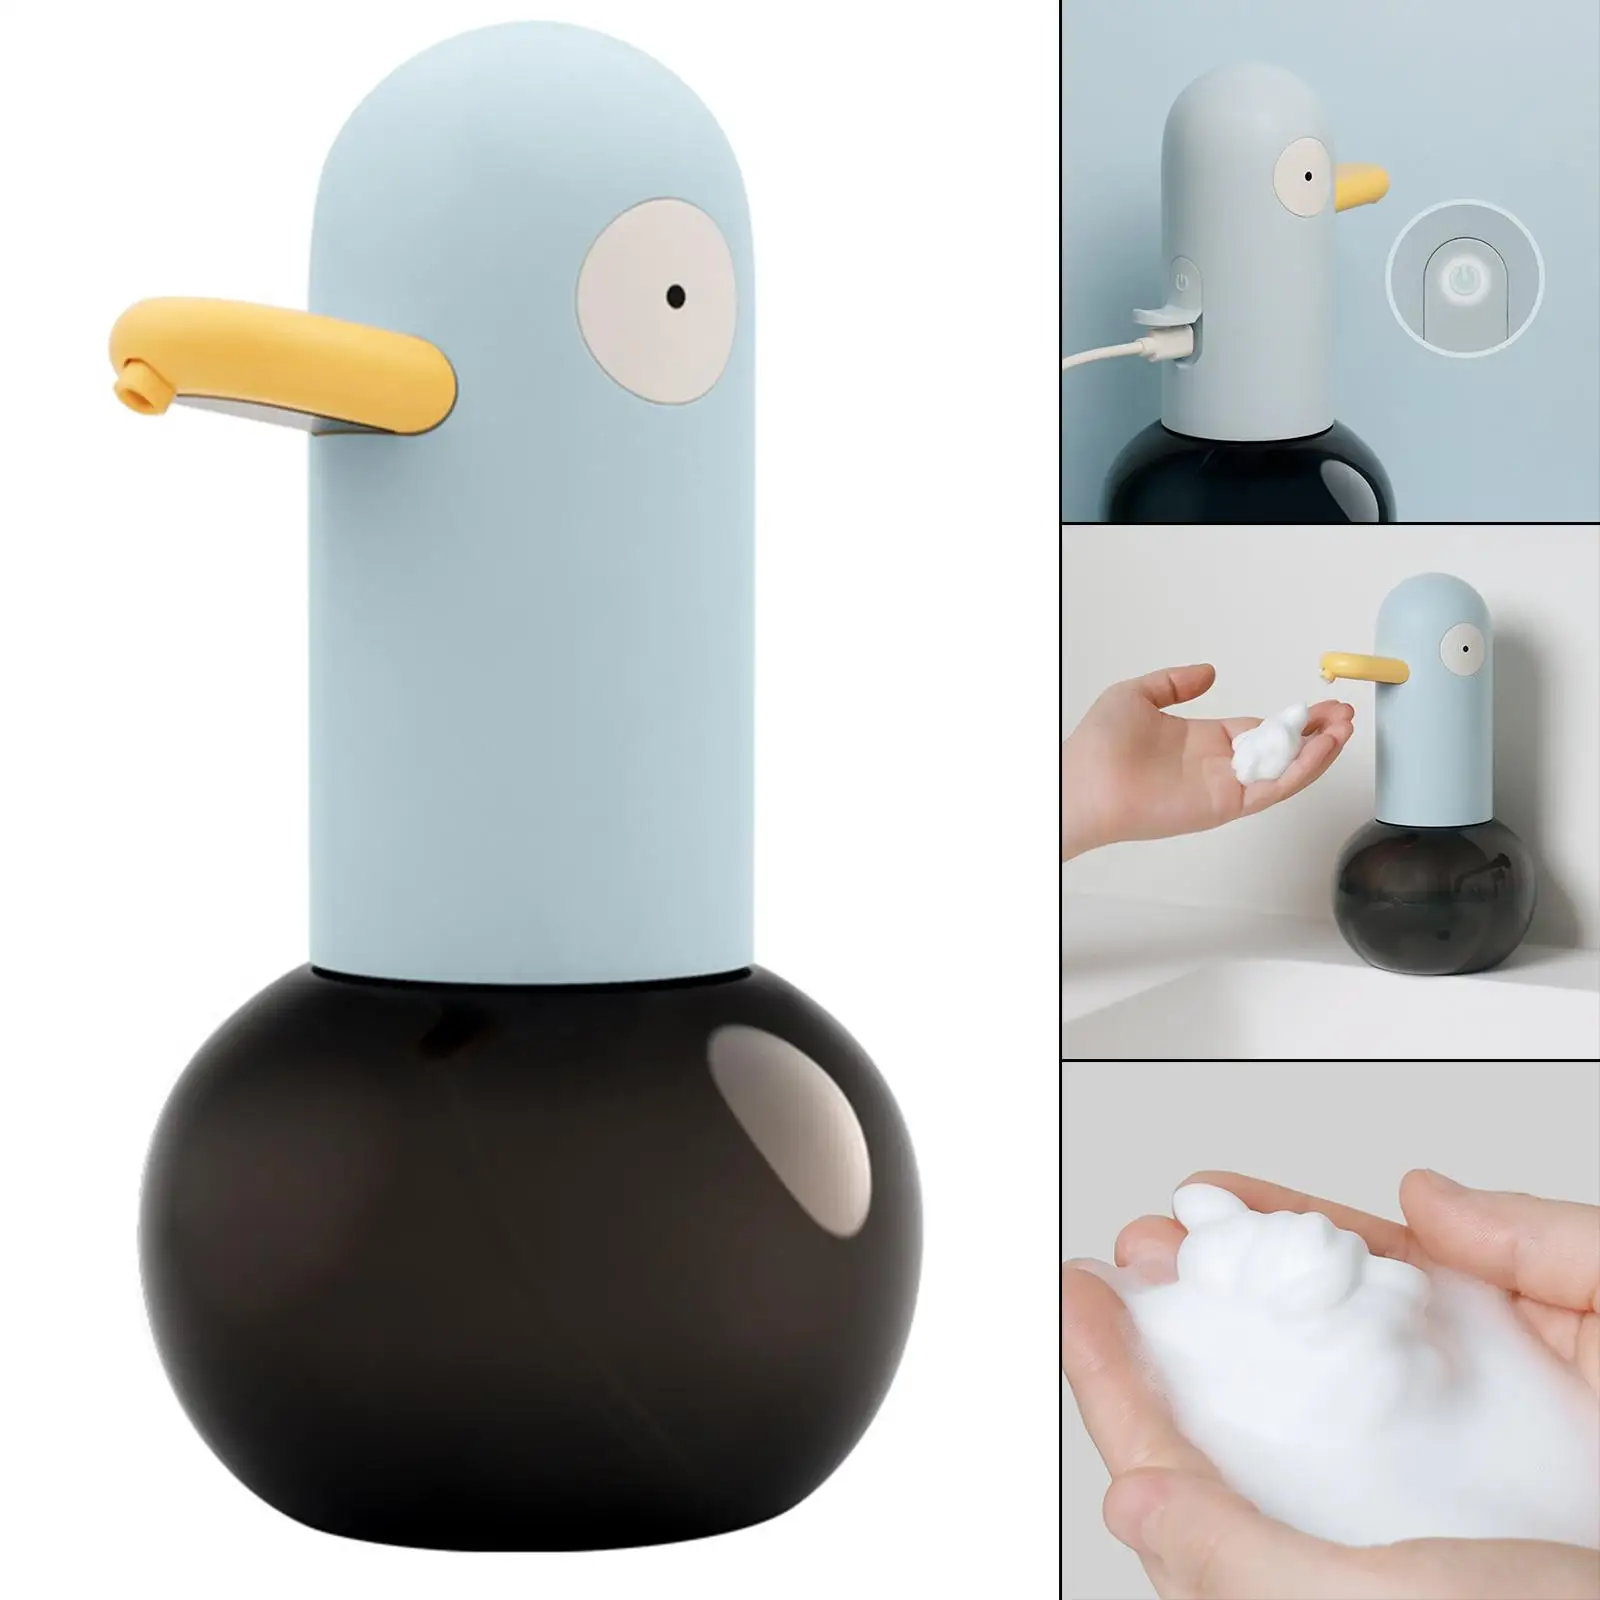 Loviver Automatic Soap Dispenser Touchless Foam Hand Washing for Bathroom